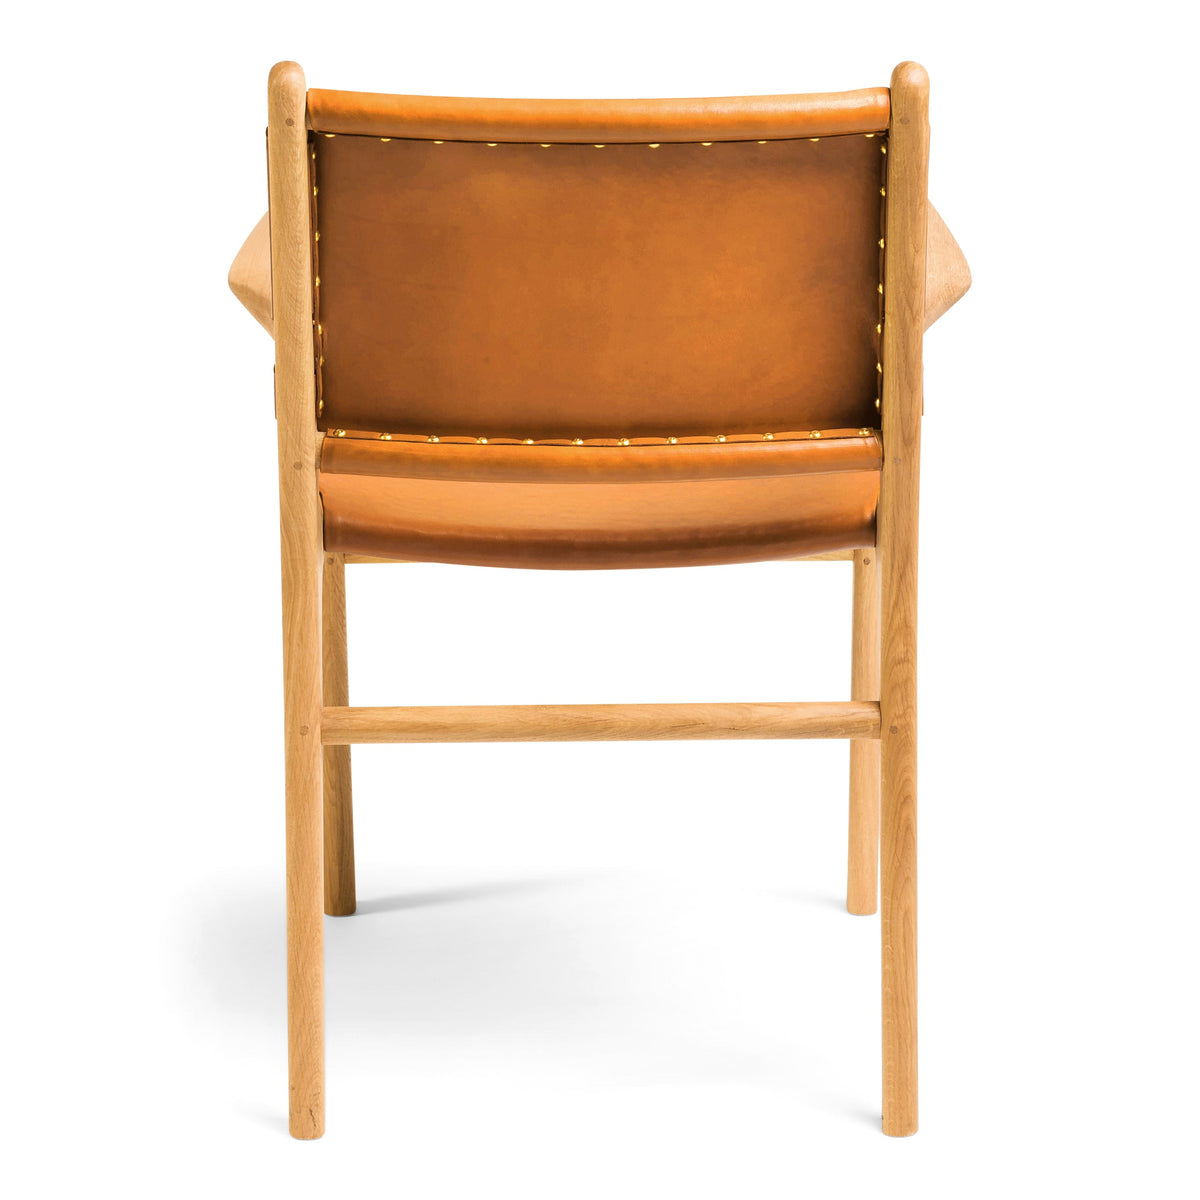 Clearance - Fenwick Dining Chair - Whiskey